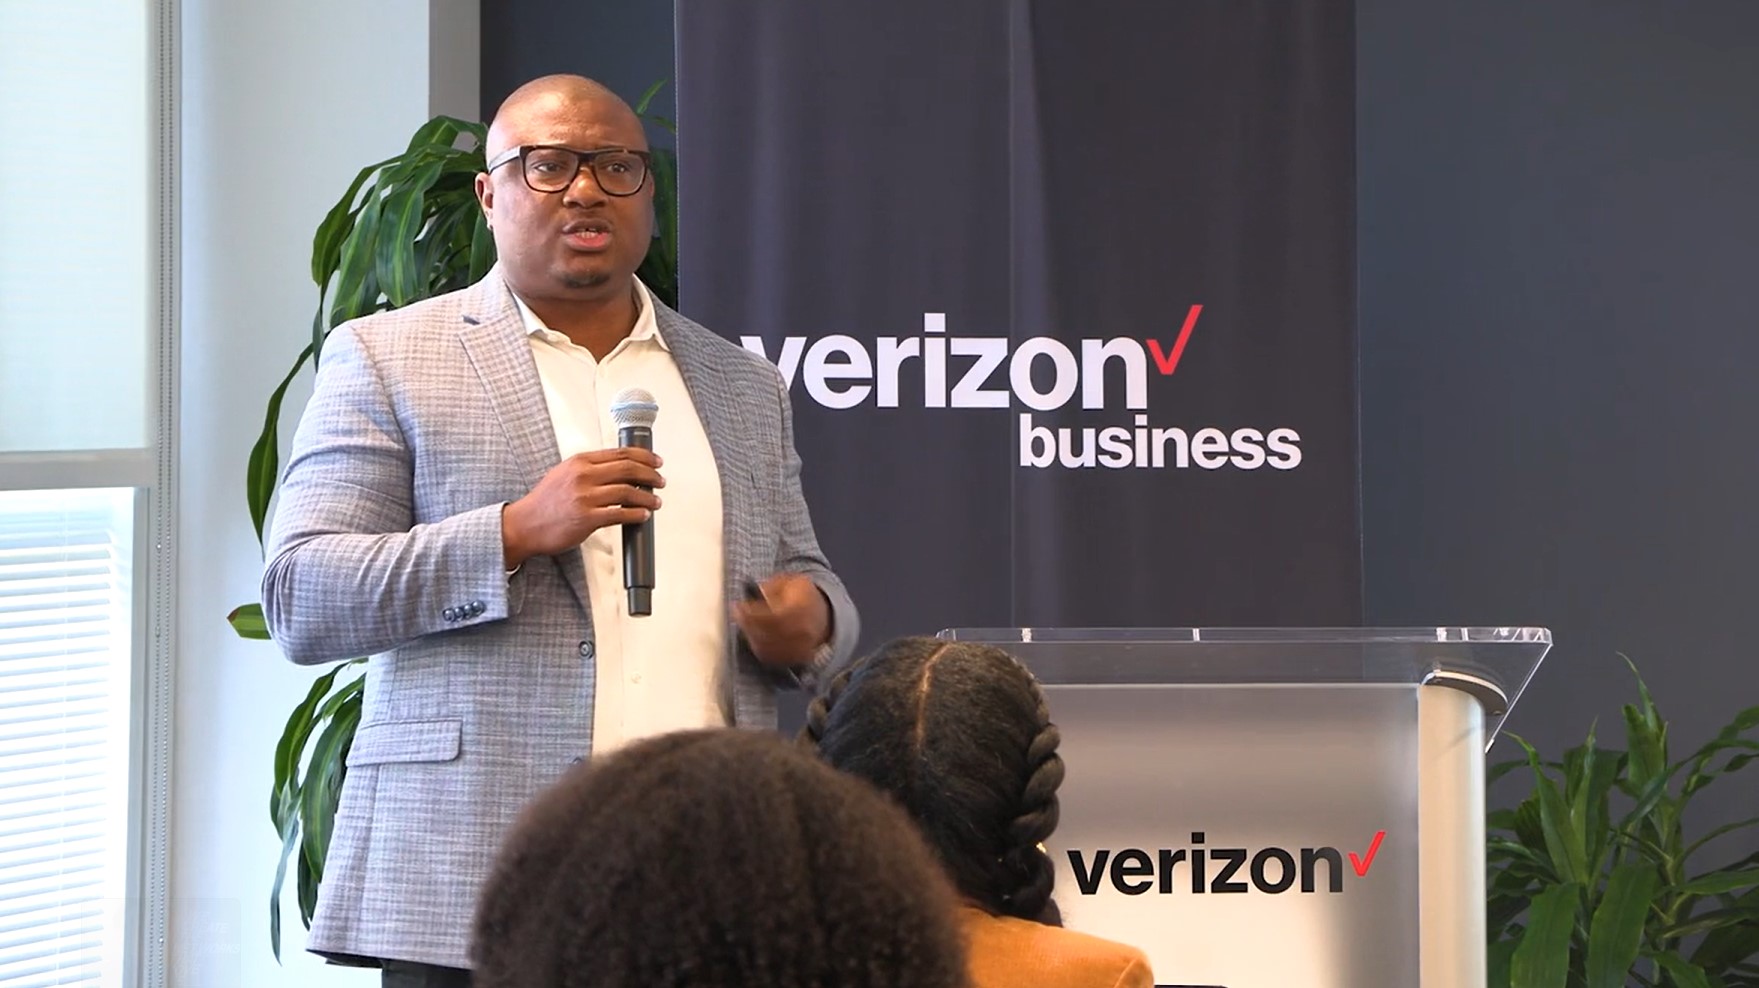 VIP Series: Small Business Digital Ready in DC